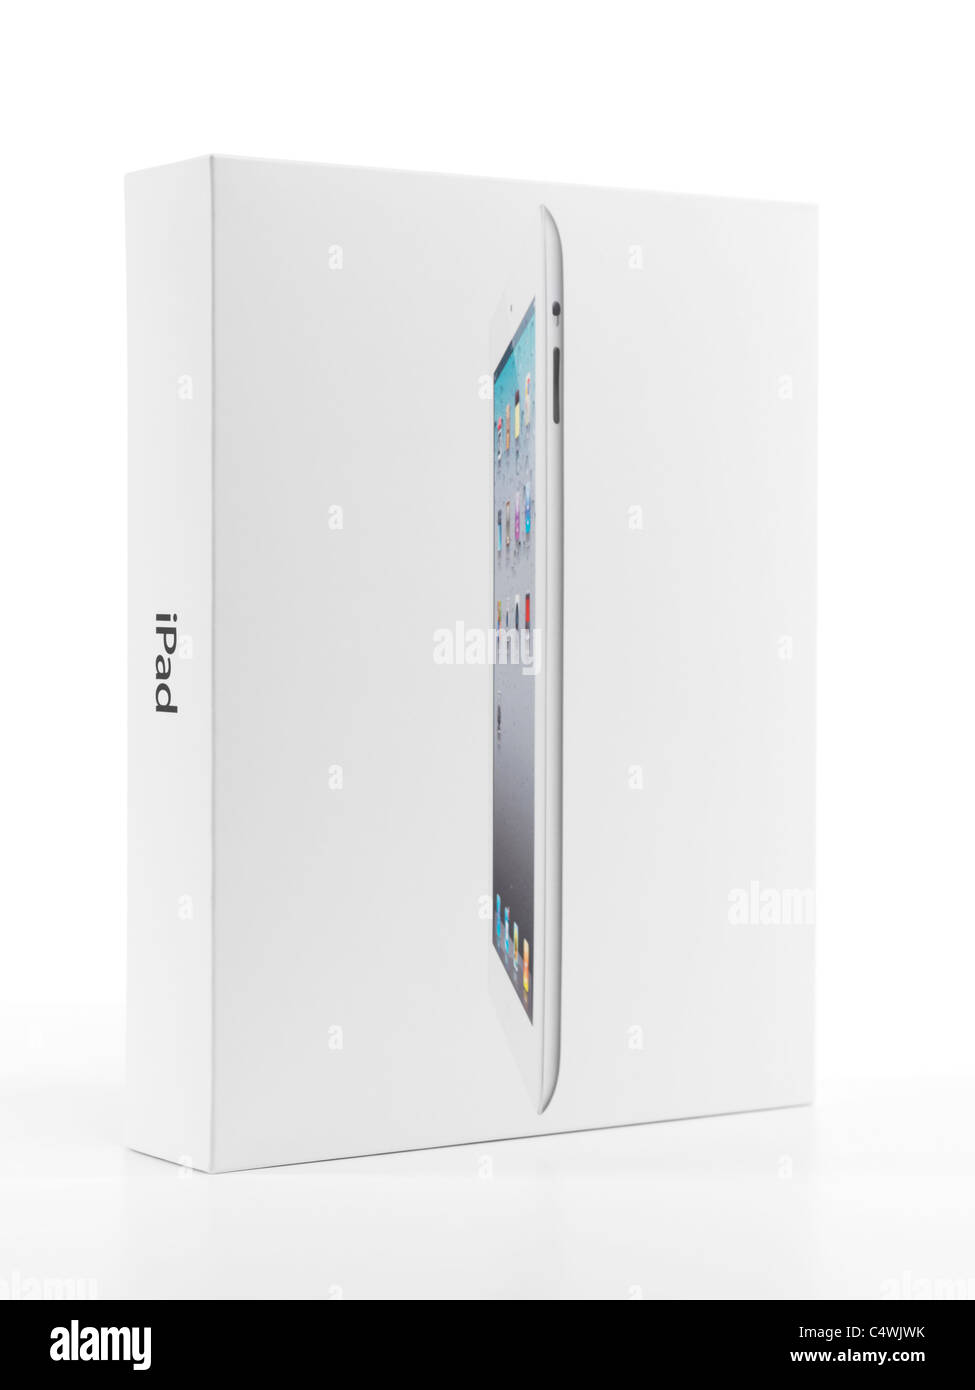 Apple iPad 2 product packaging. Isolated box on white background. Stock Photo